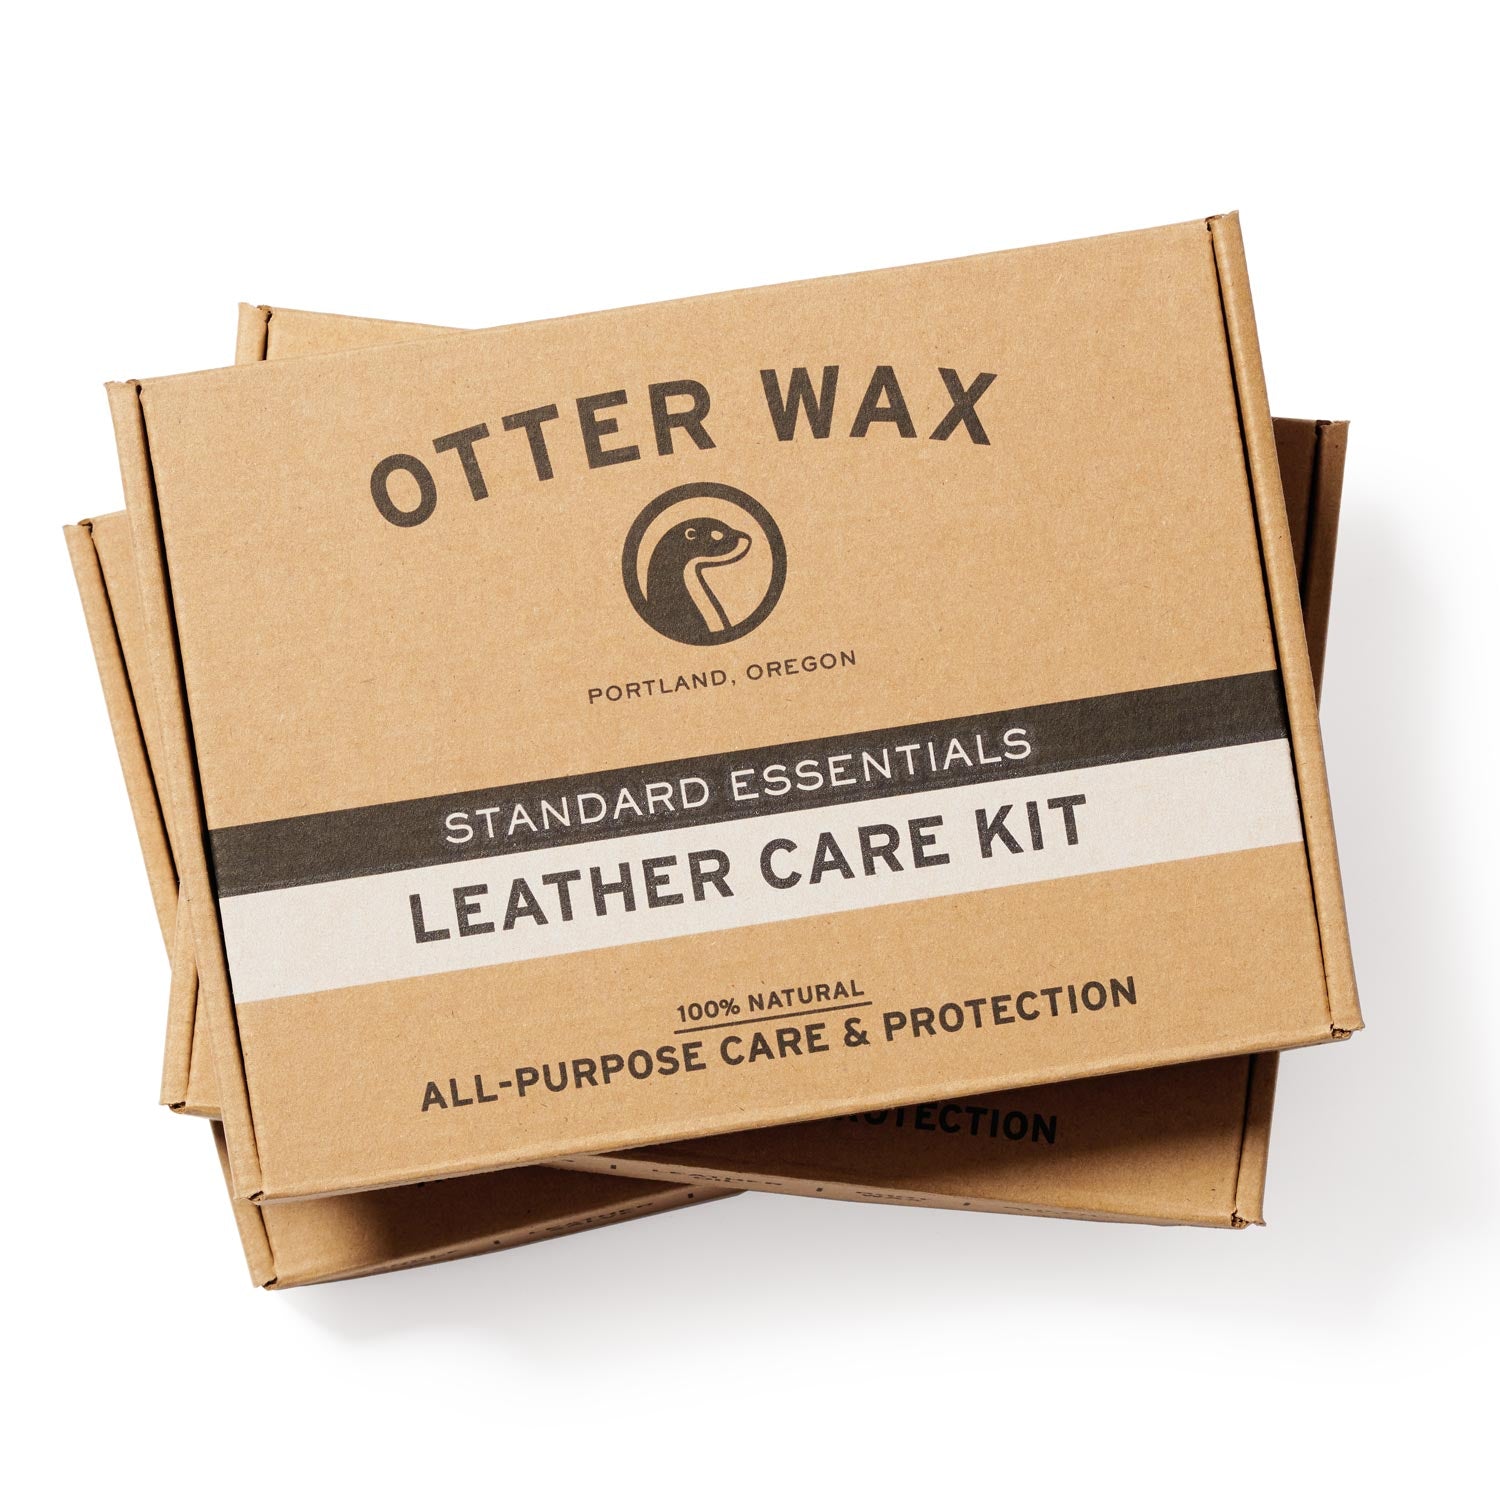 Leather cleaning kit